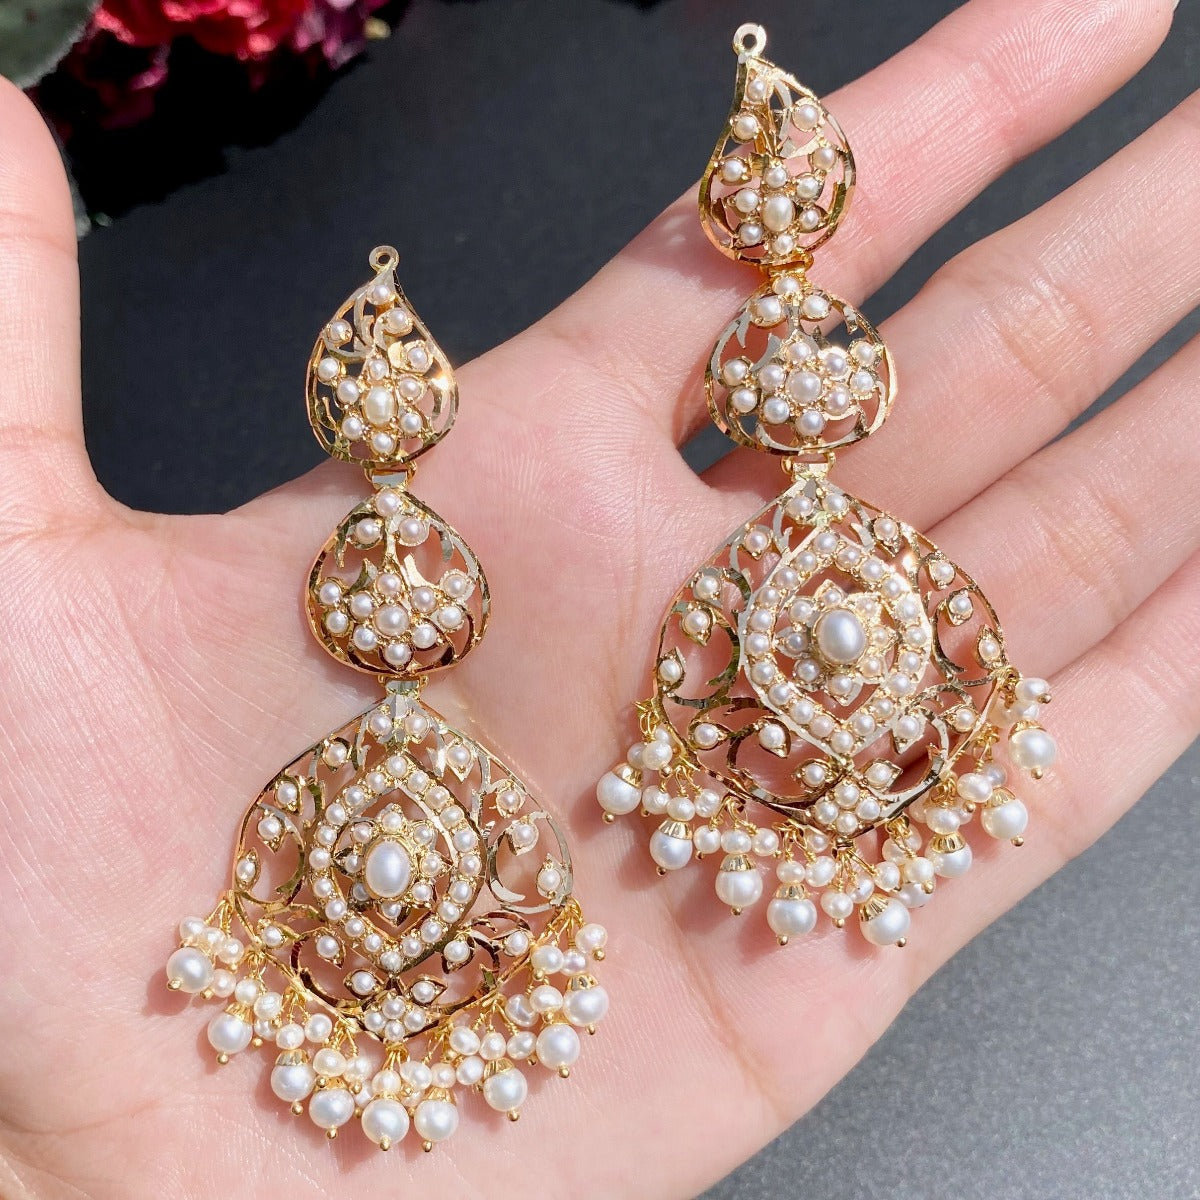 antique look 22k gold earrings studded with pearls